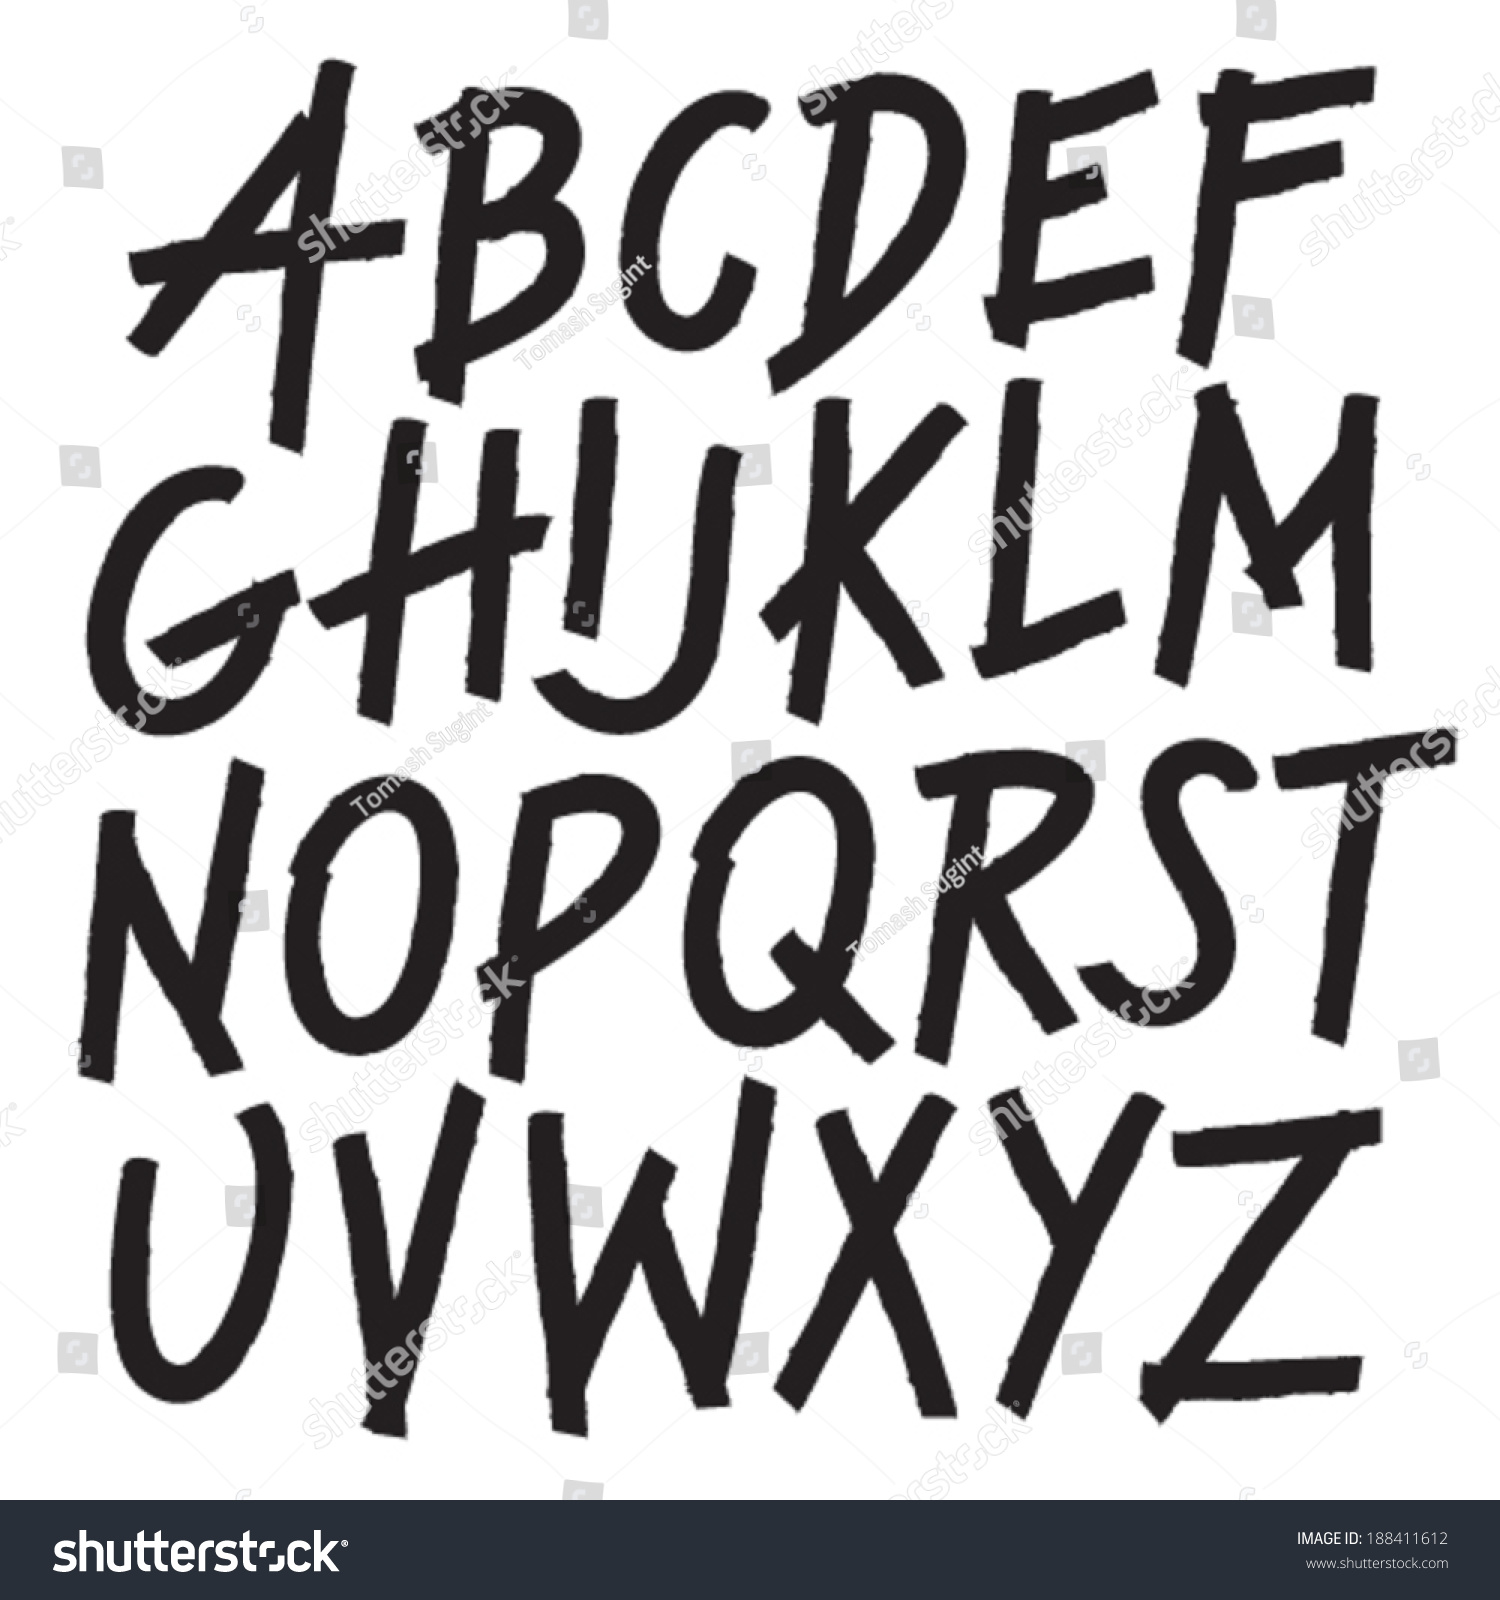 Font Based On The Cool S That Everyone Learns To Draw When They Are A Teenager Boing Boing